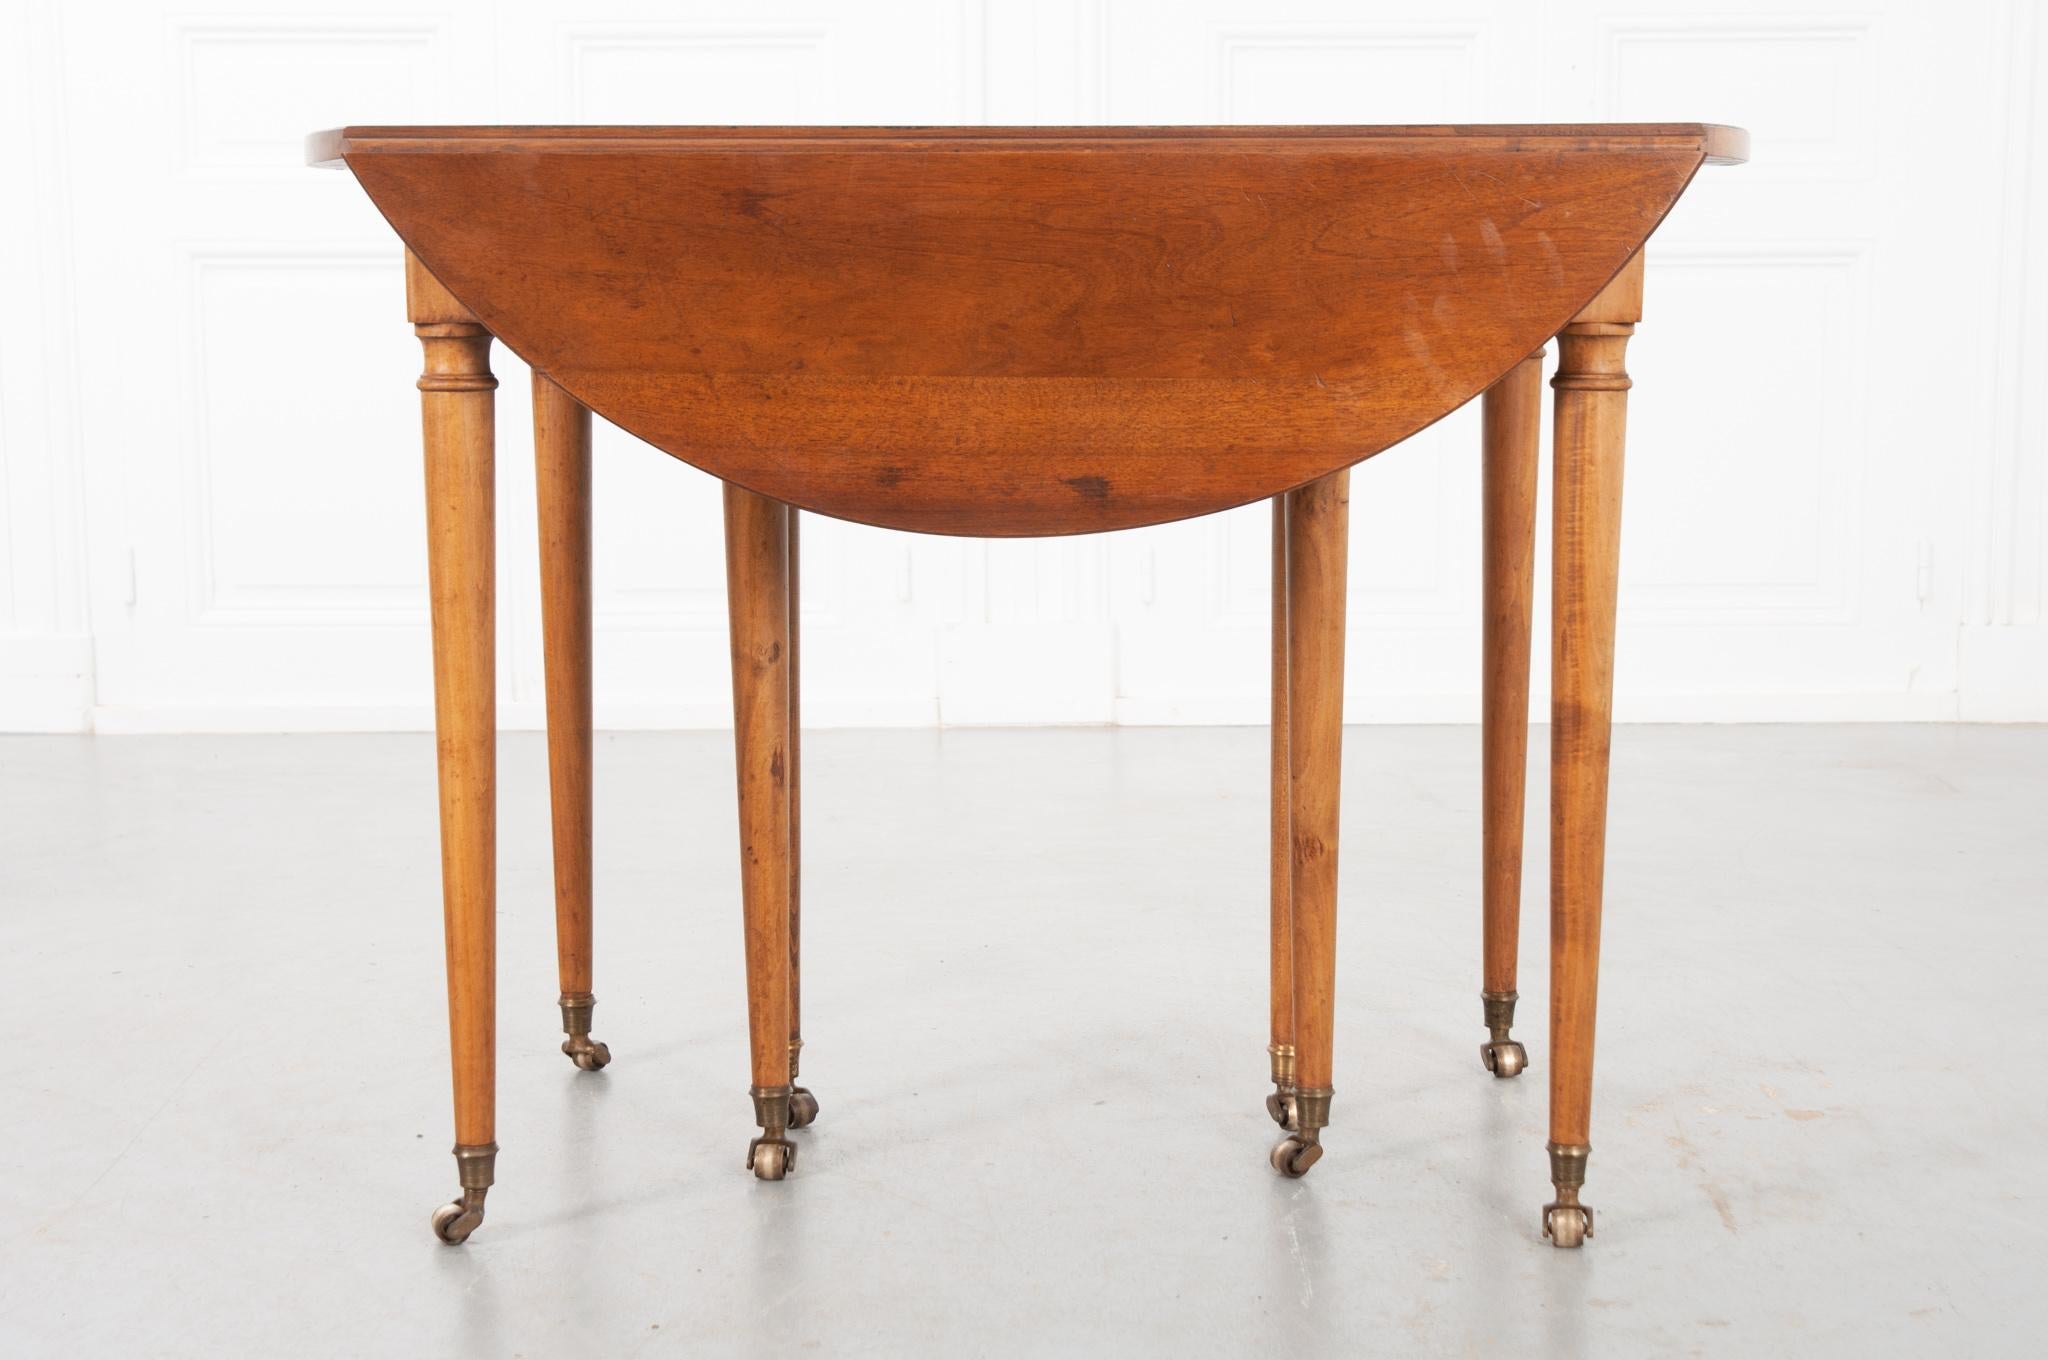 A lovely French 19th century drop leaf extending dining table. The fruitwood has a nice warm patina. The top sits over a simple apron supported with four tapered legs on brass caps with brass casters. There are four legs, also on casters, in the